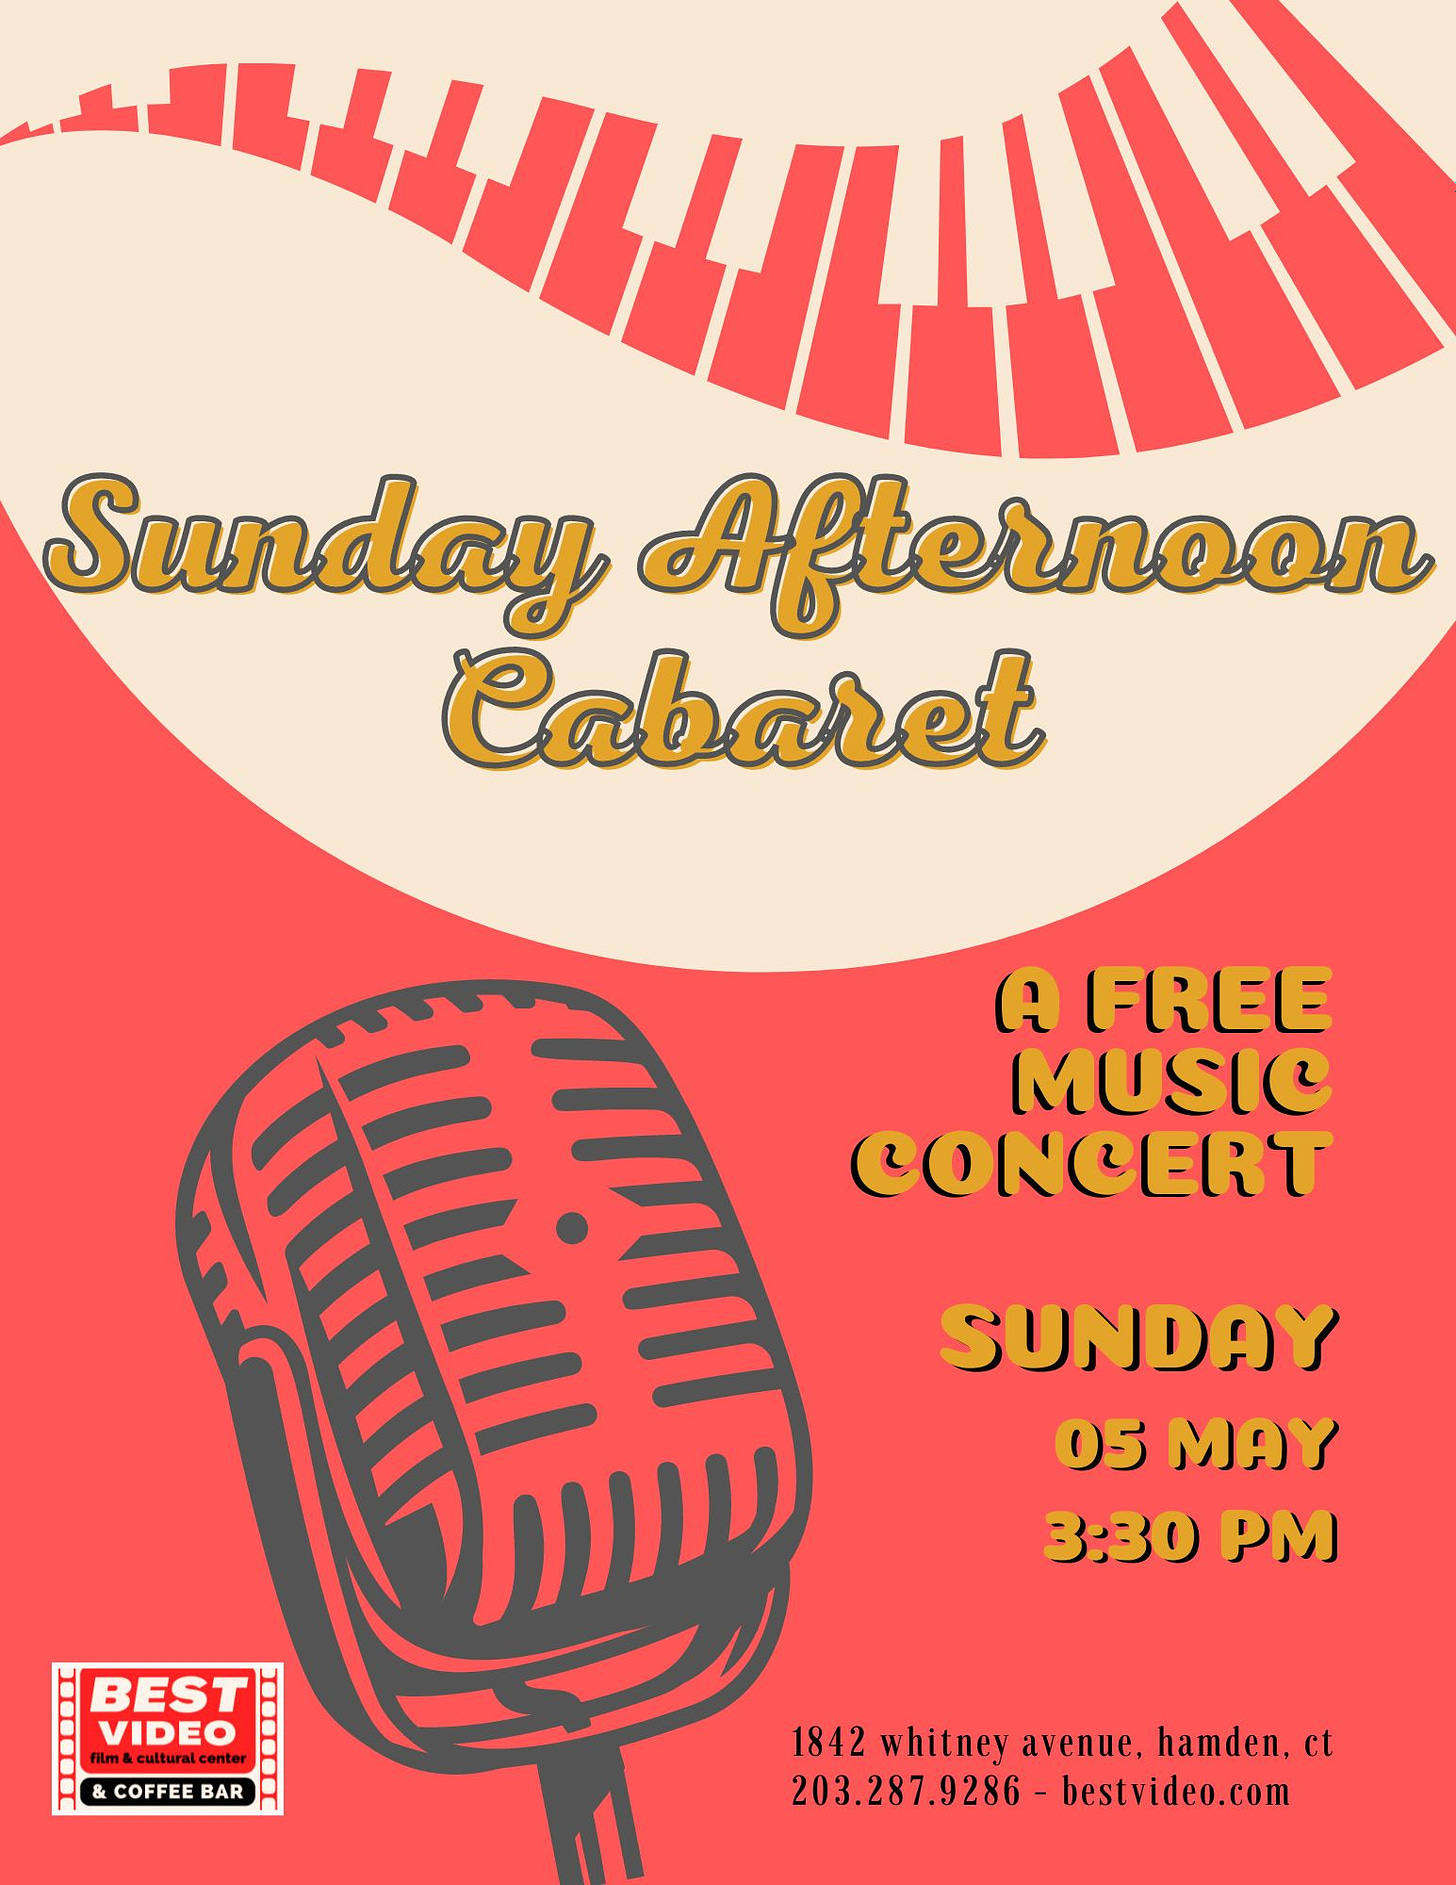 May be an image of piano and text that says 'Sunday Afternoon Cabaret A FREE MUSIC CONCERT SUNDAY 05 MAY 3:30 PM BEST: VIDEO COFFEE BAR 1842 whitney avenue, hamden. 203.287.9286- 203.287.9286-bestvideo.com bestvideo.com'